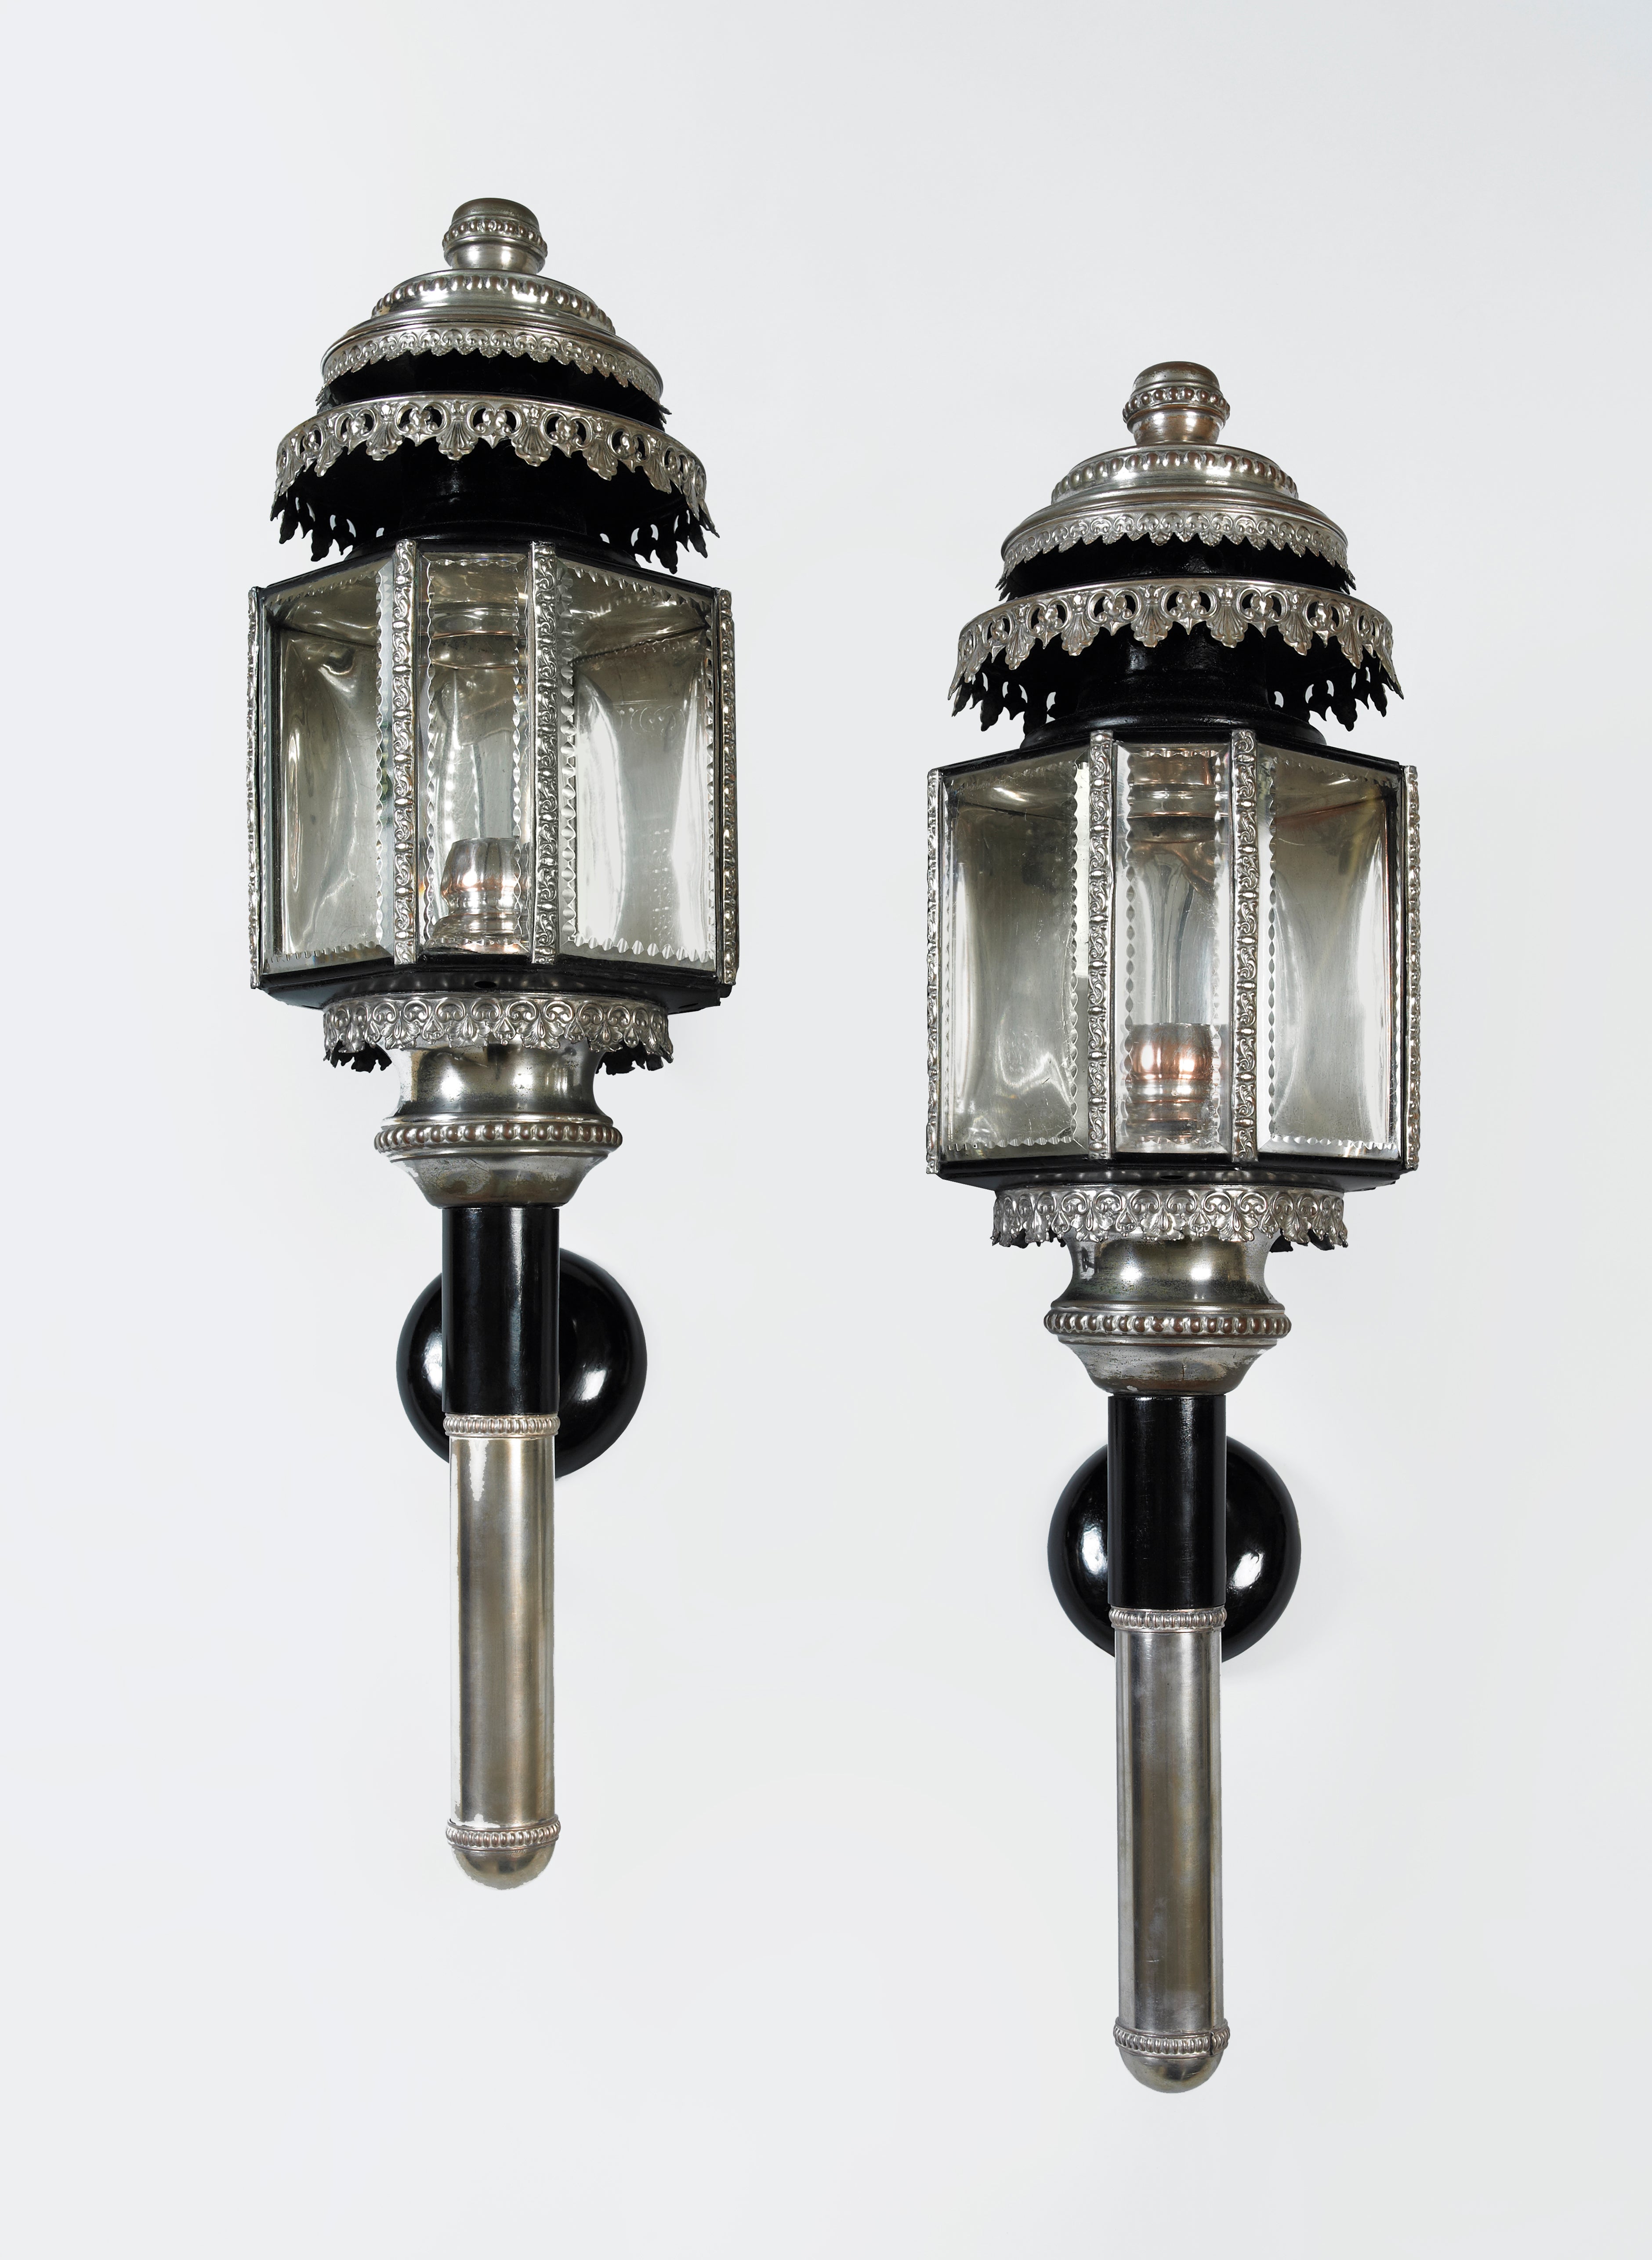 A Pair of 19th-Century Carriage Lamps 